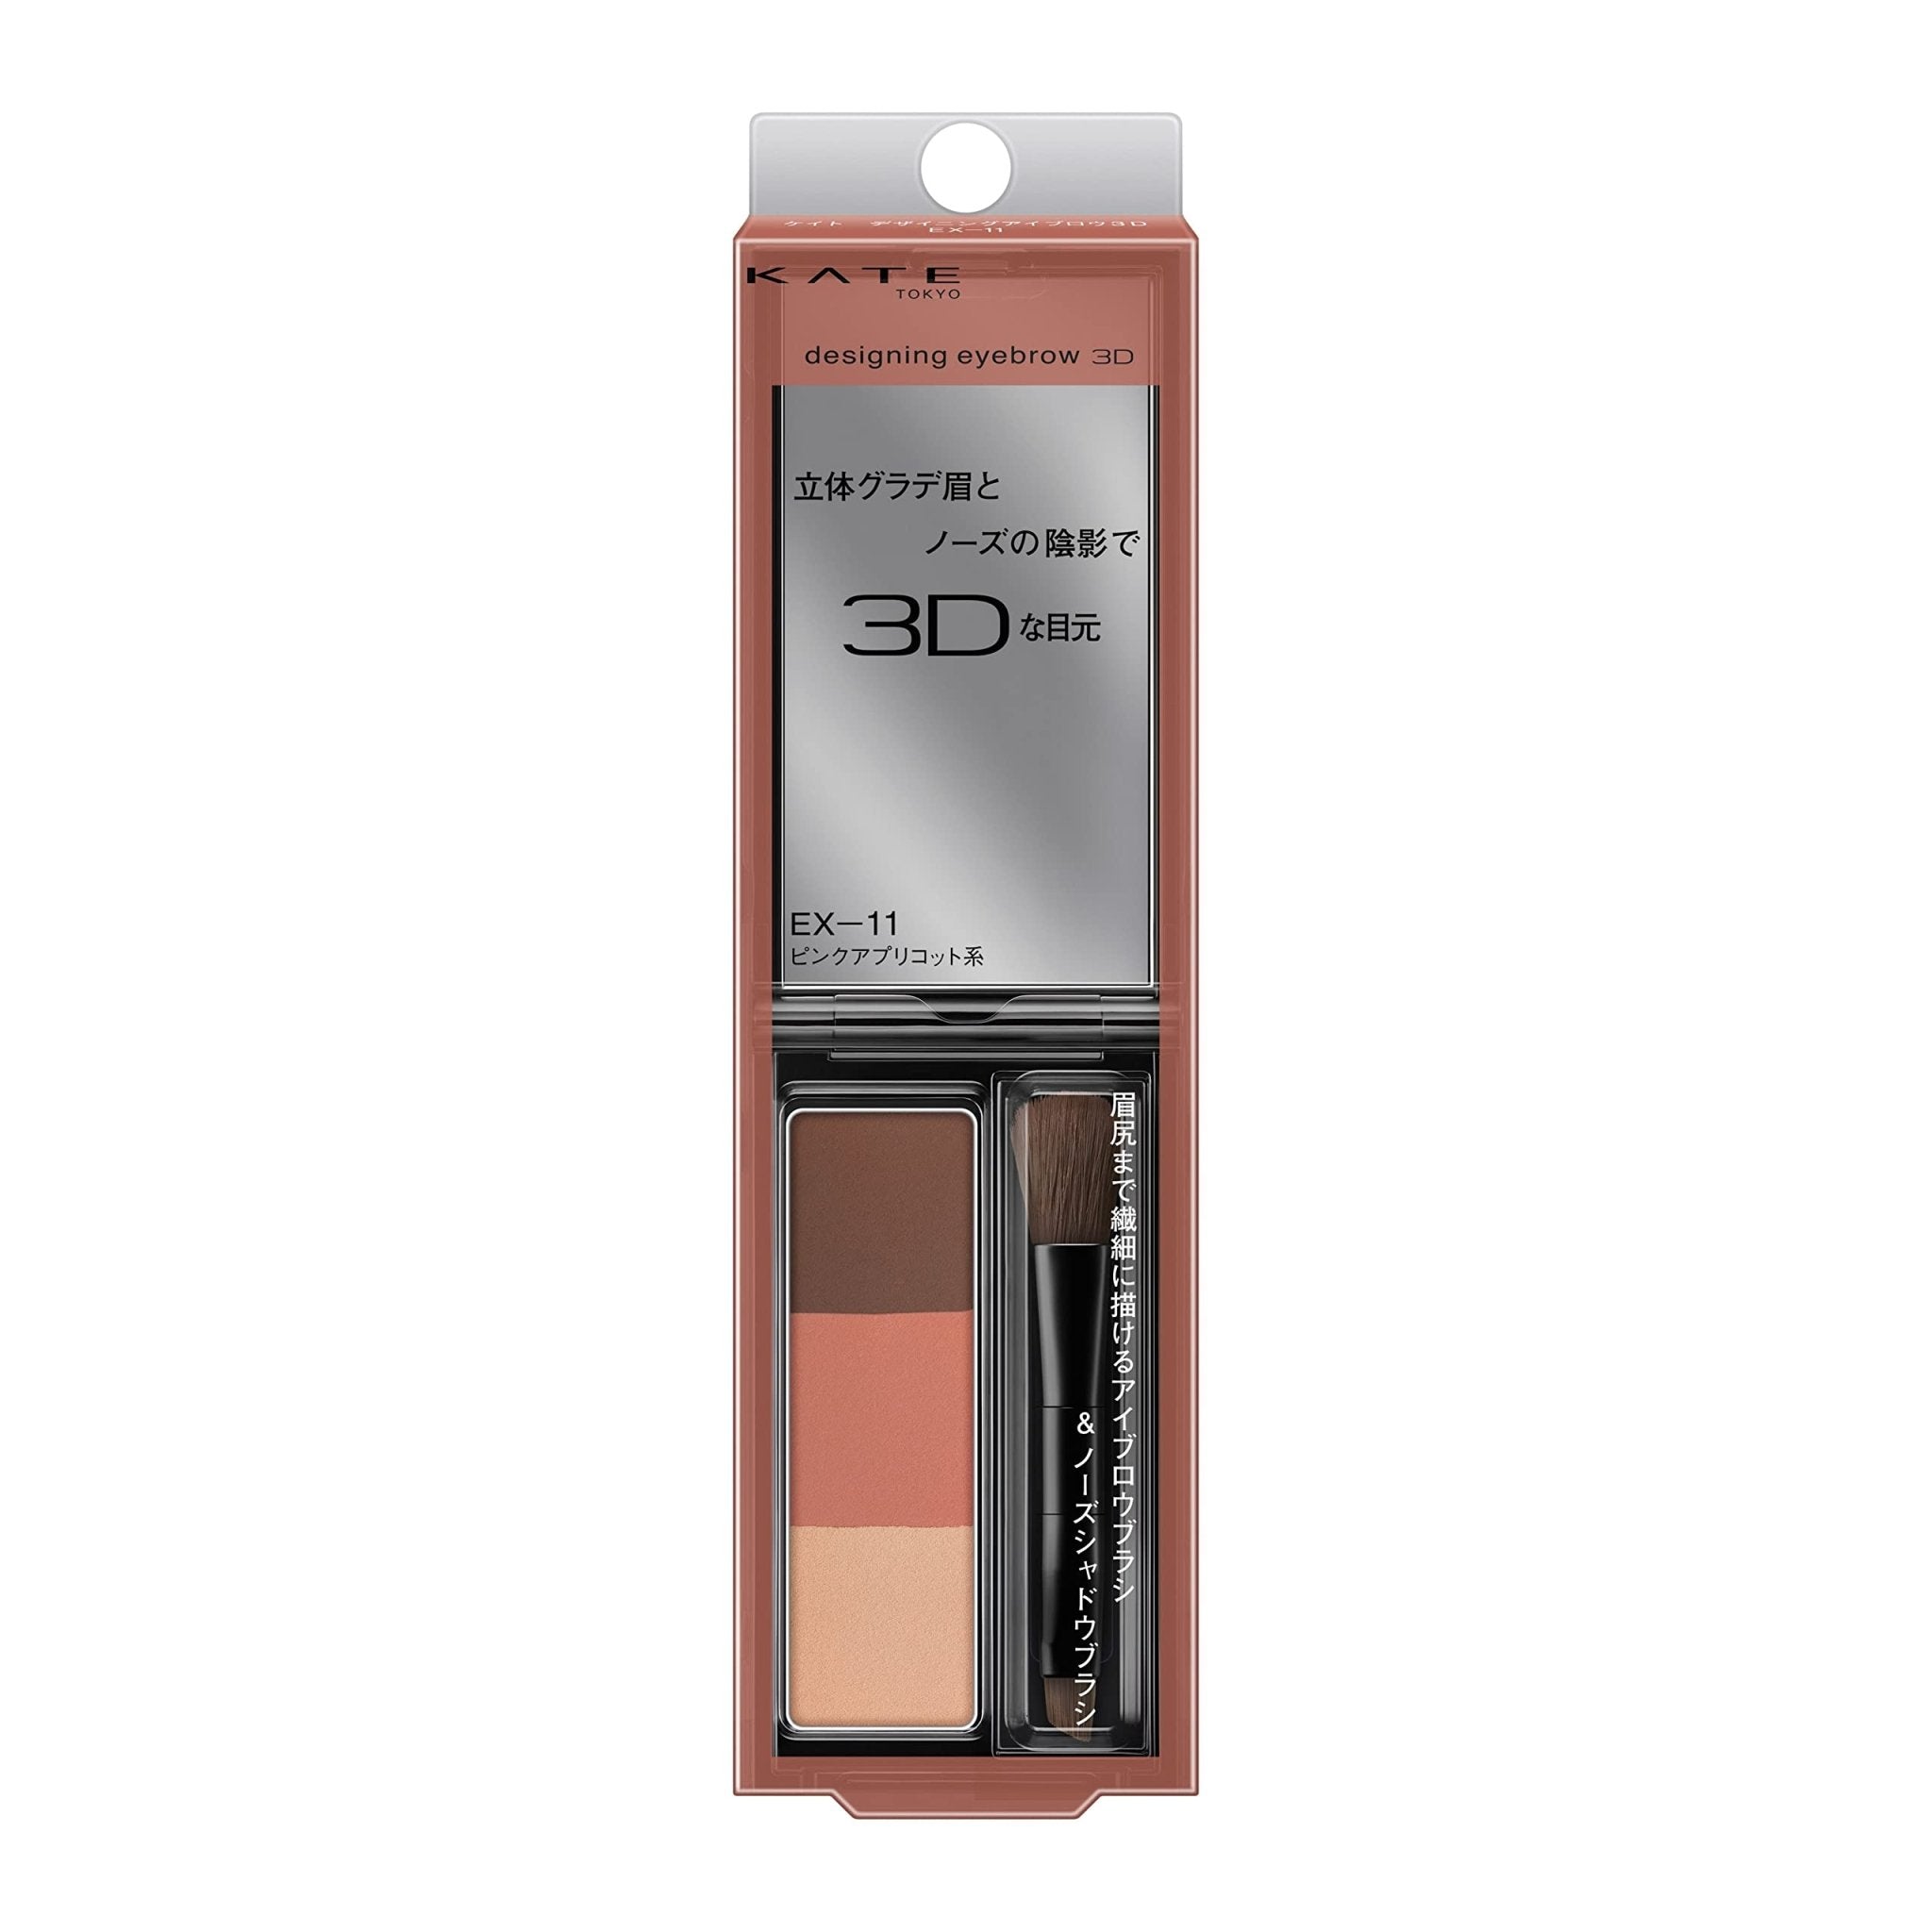 Kate Ex - 11 3D Designing Eyebrow Pencil 2.2G - Pack of 1